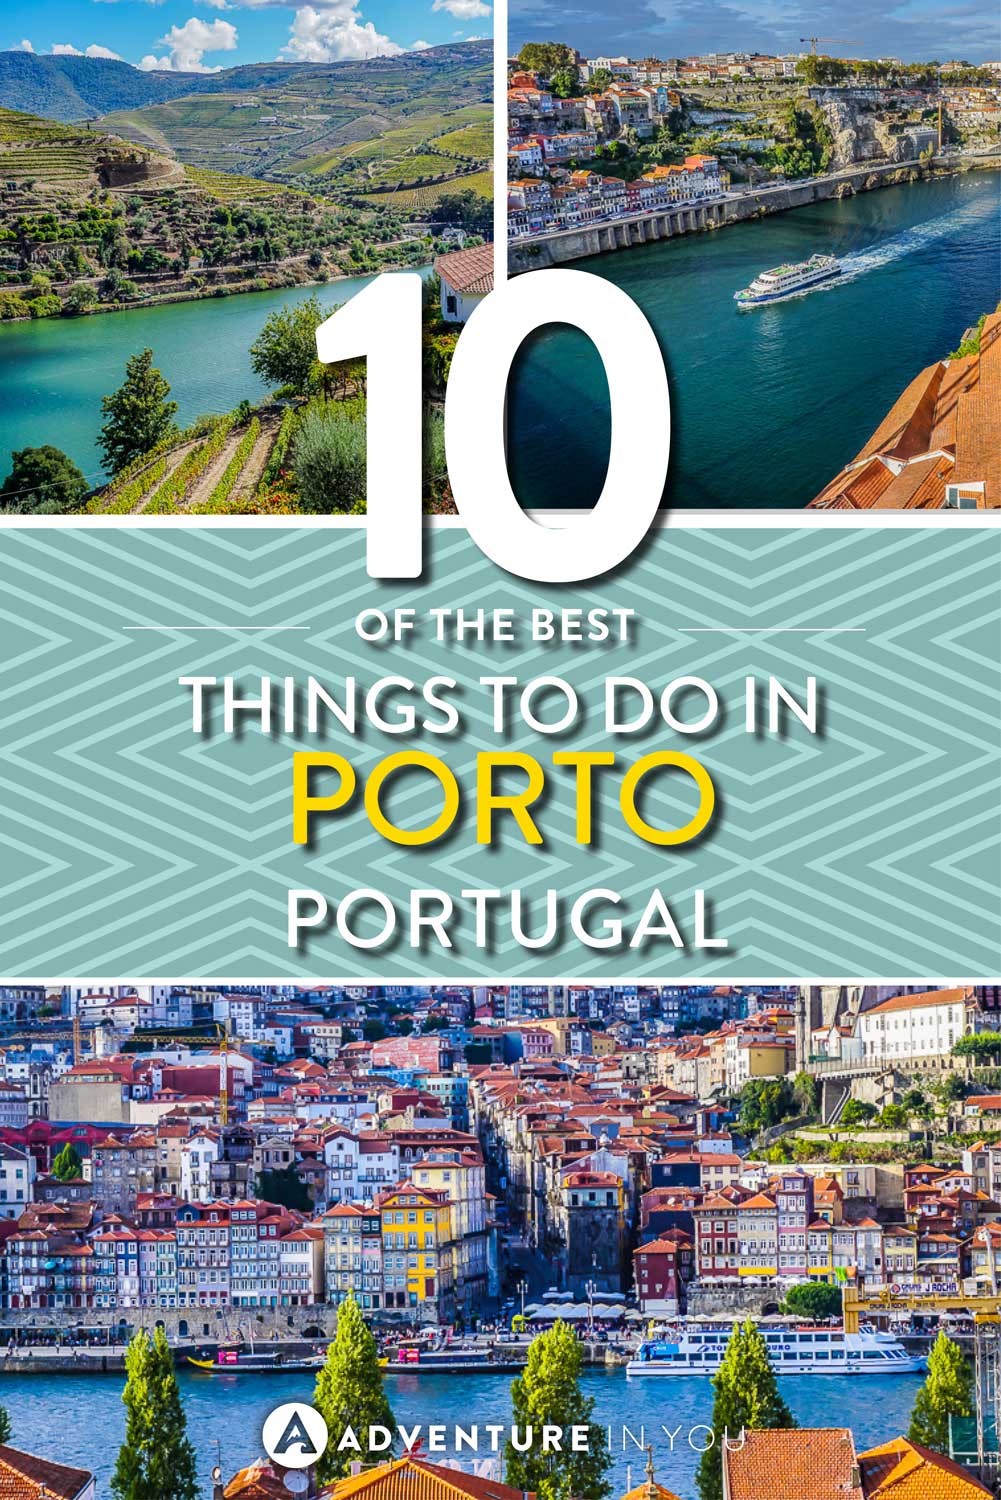 Porto Portugal | Planning a trip to Porto and wondering what to do? Check out our guide on the best things to do in Porto from boat cruises, popular attractions to visiting vineyards.